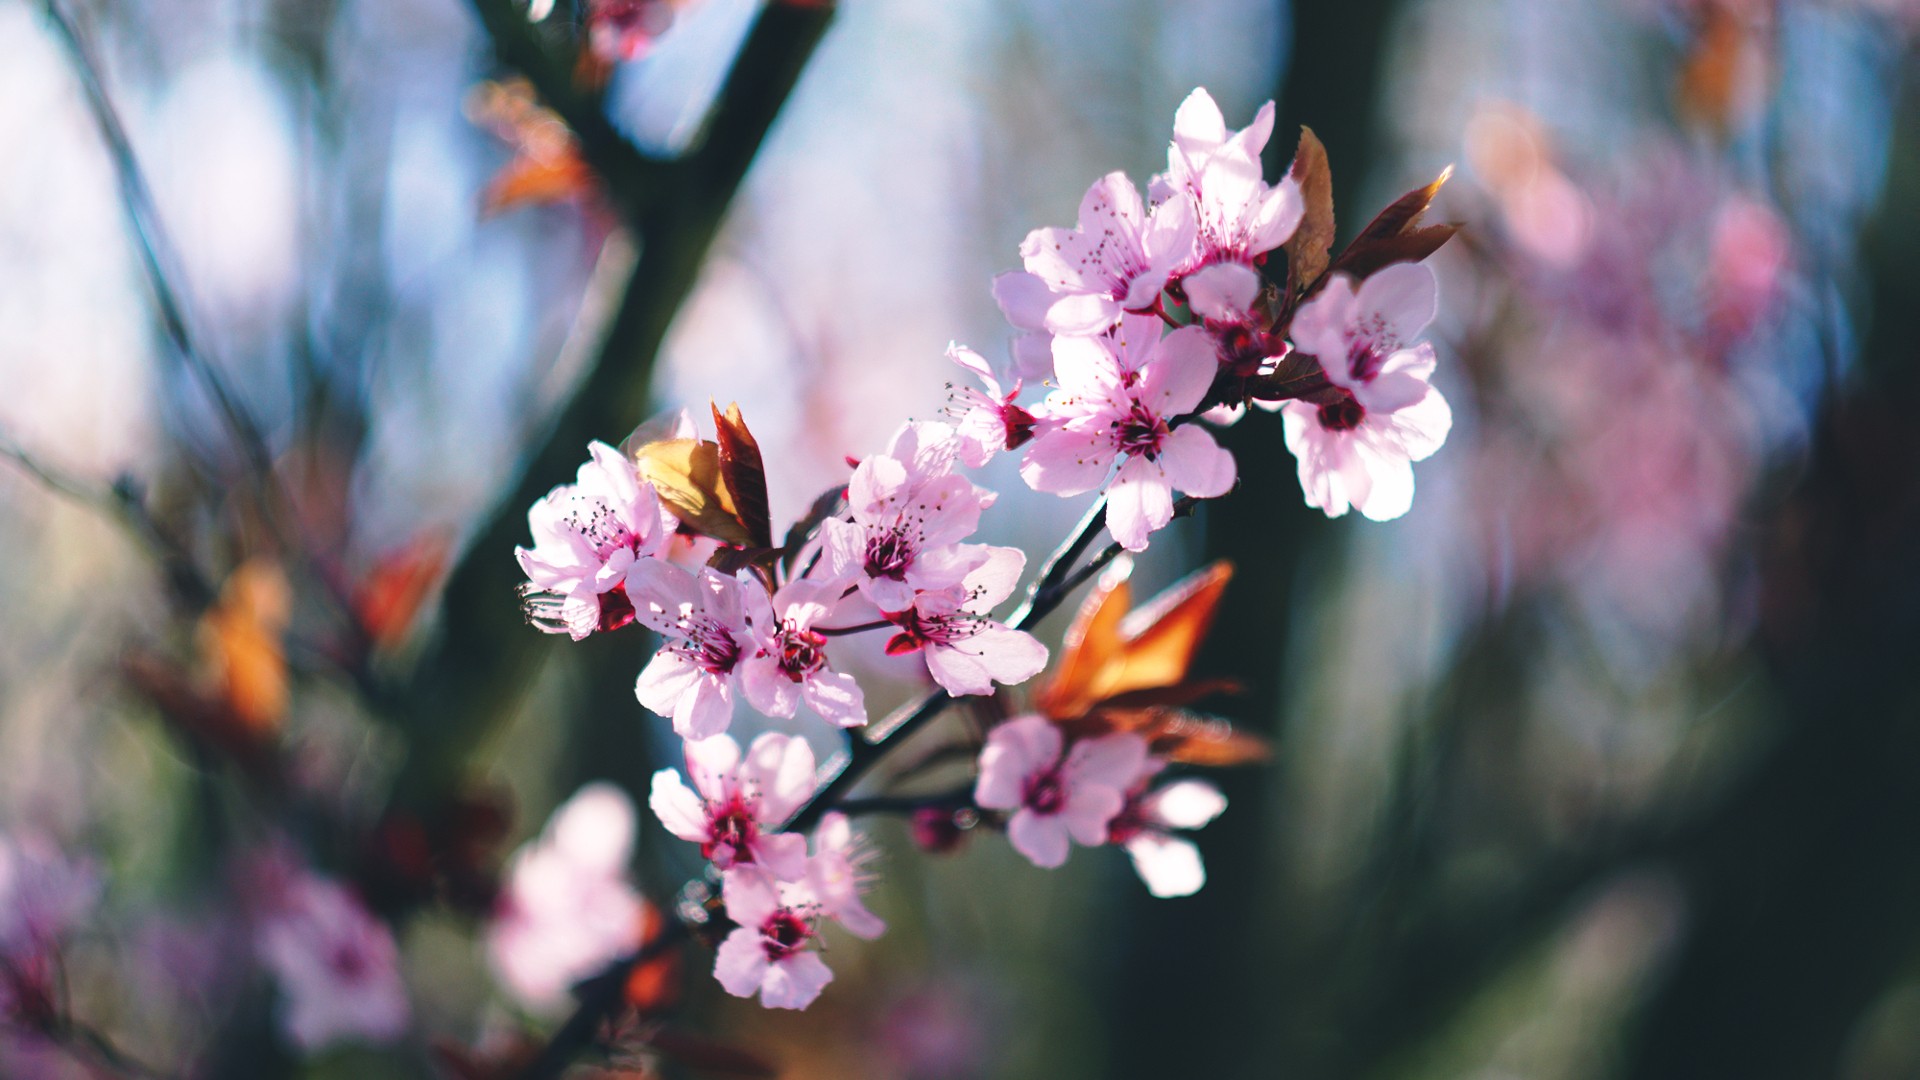 General 1920x1080 spring blossoms trees pink flowers plants outdoors